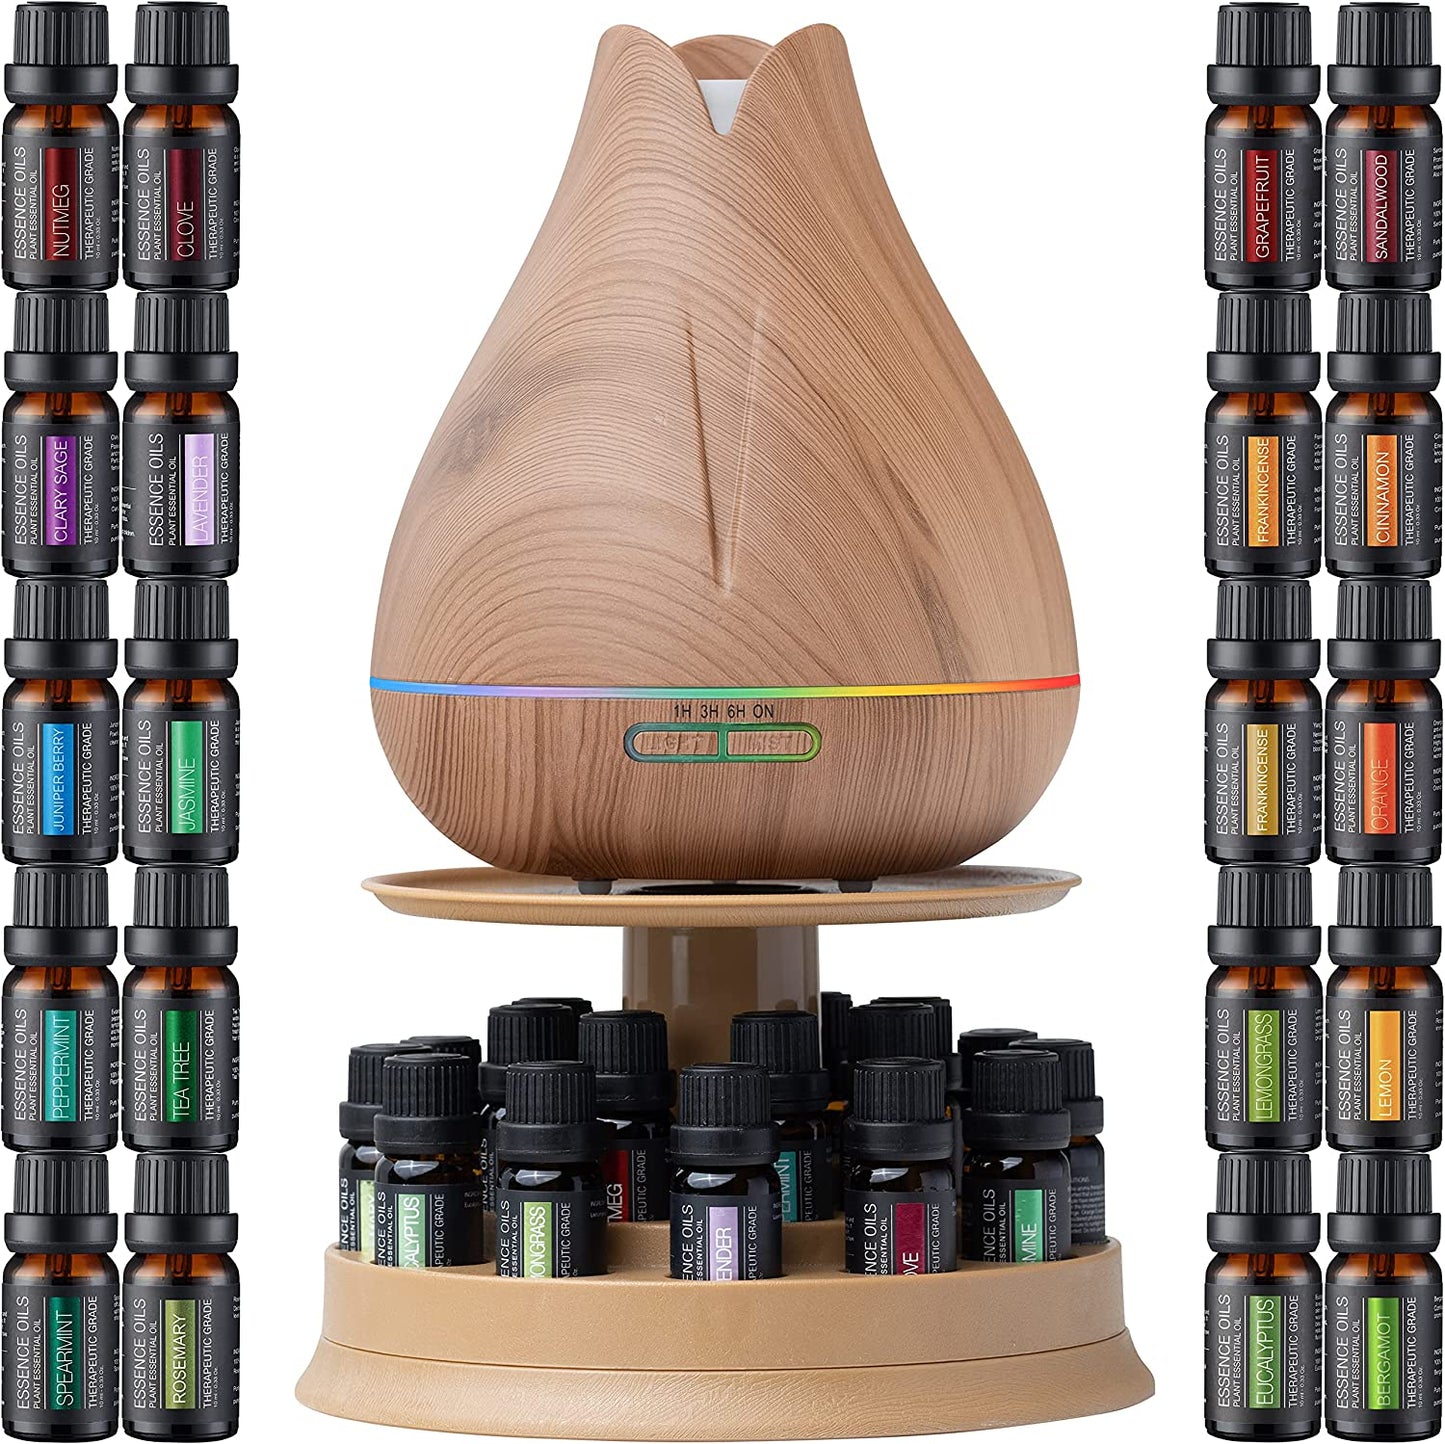 Aromatherapy Essential Oil Diffuser Gift Set - 400Ml Ultrasonic Diffuser with 20 Essential Plant Oils - 4 Timer & 7 Ambient Light Settings - Therapeutic Grade Essential Oils